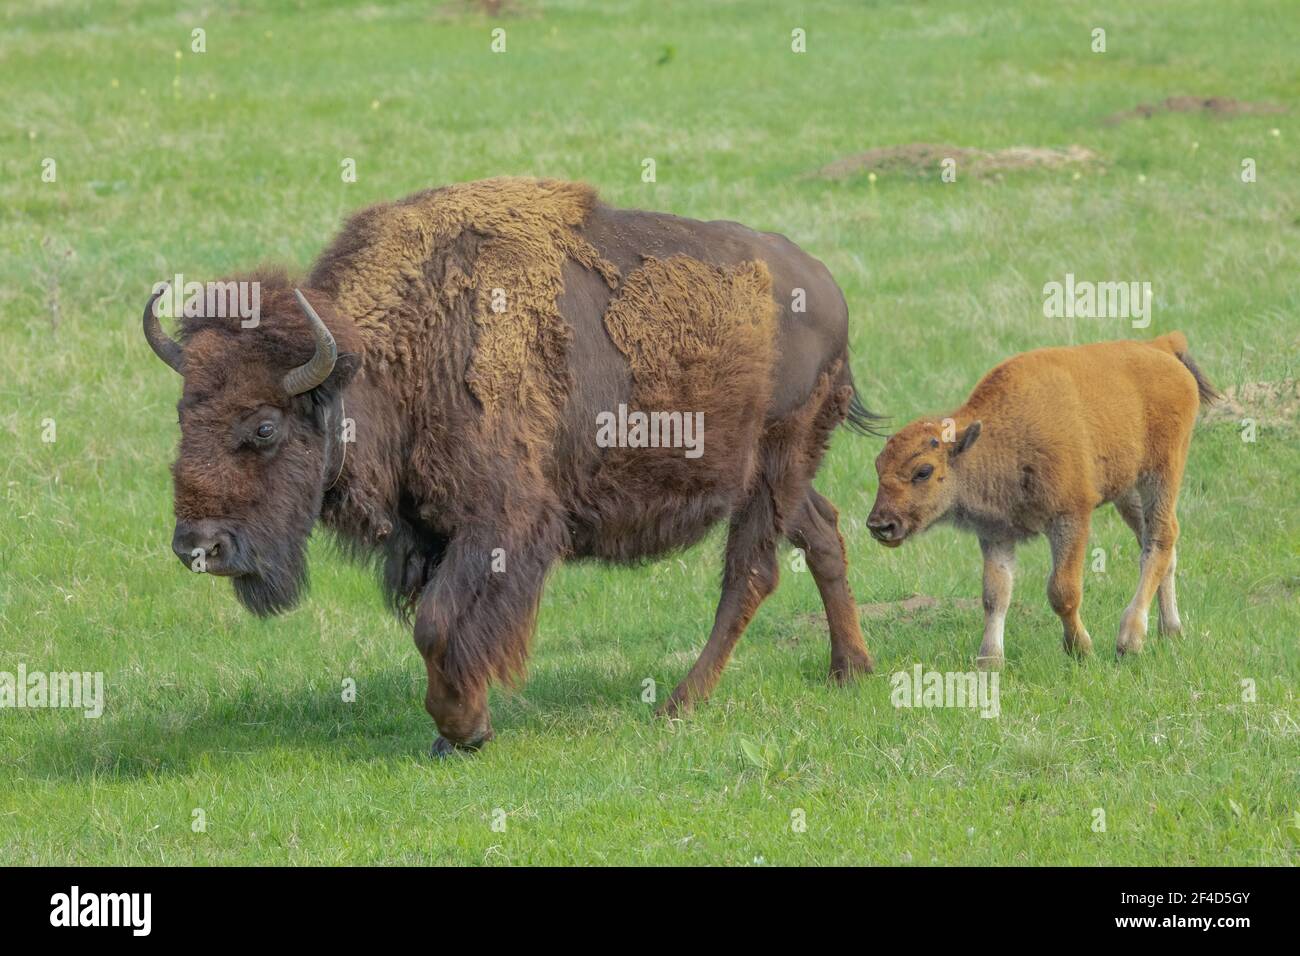 Female bison with her calf walking through the grass. Stock Photo